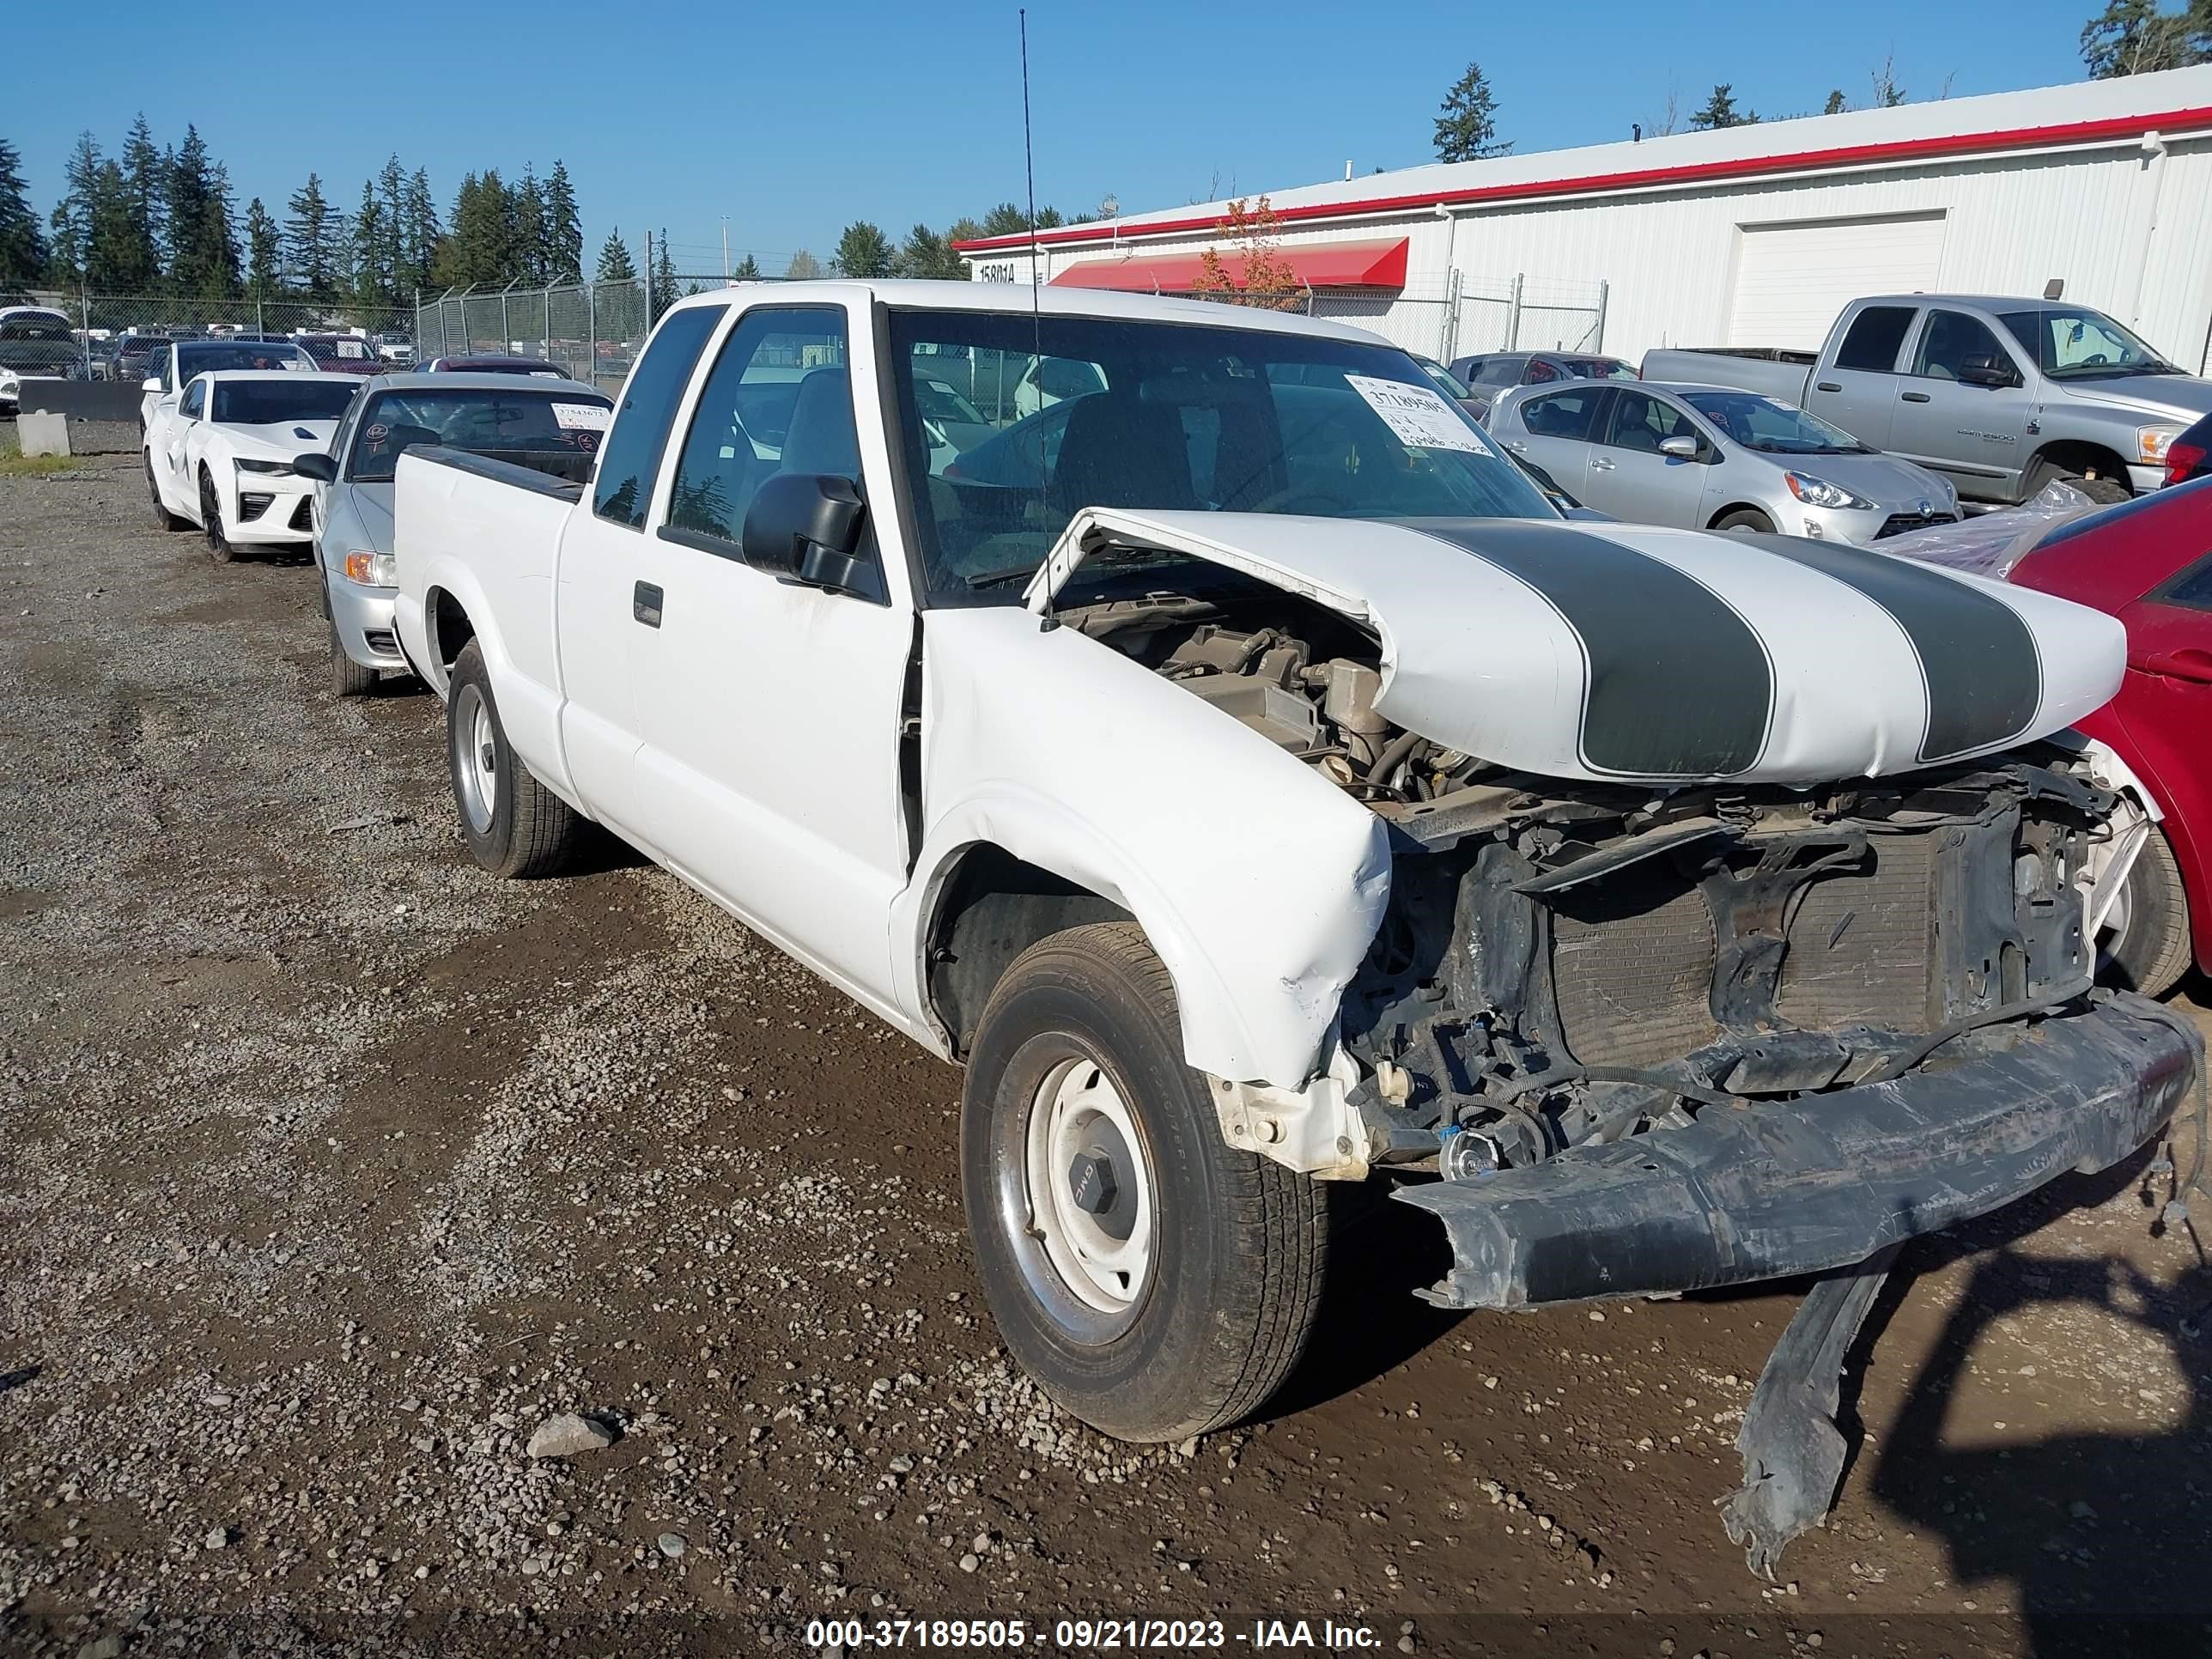 vin: 1GTCS19W318214004 1GTCS19W318214004 2001 gmc sonoma 4300 for Sale in 98374, 15801 110Th Ave E, Puyallup, Washington, USA